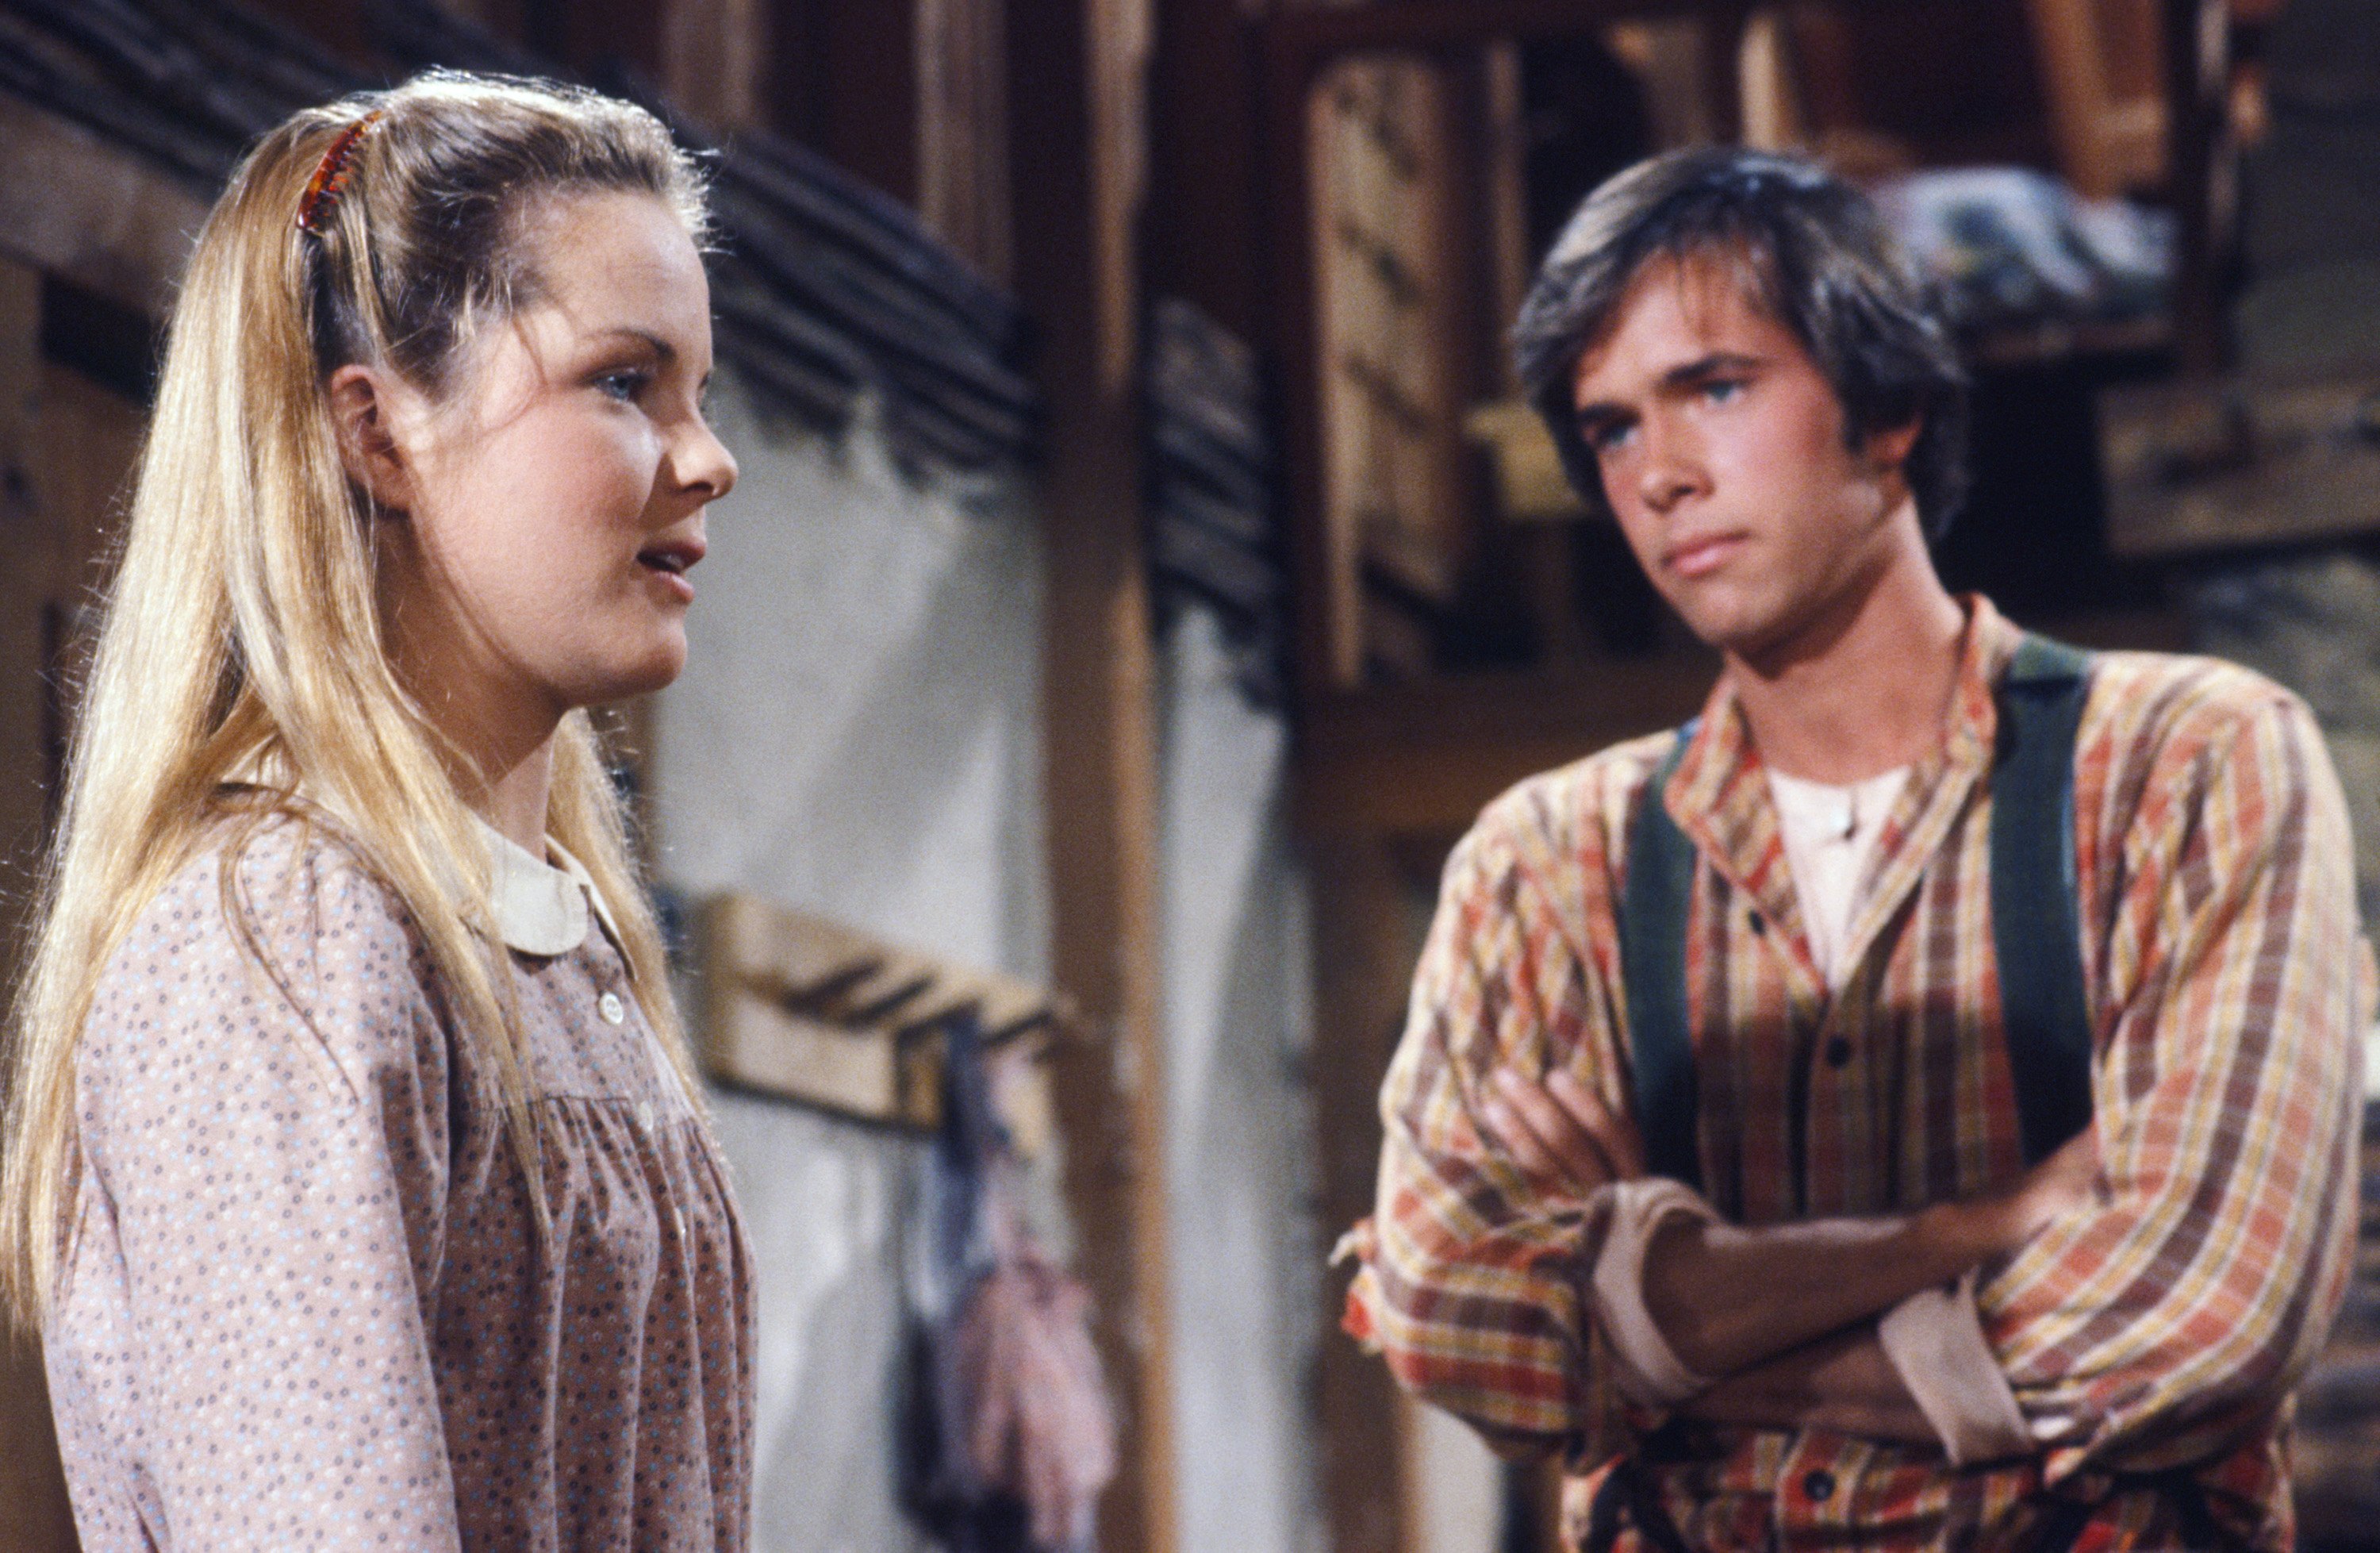 Melisssa Sue Anderson as Mary Ingalls Kendall, Robert Kenneally as Seth Barton on 'Little House on the Prairie'